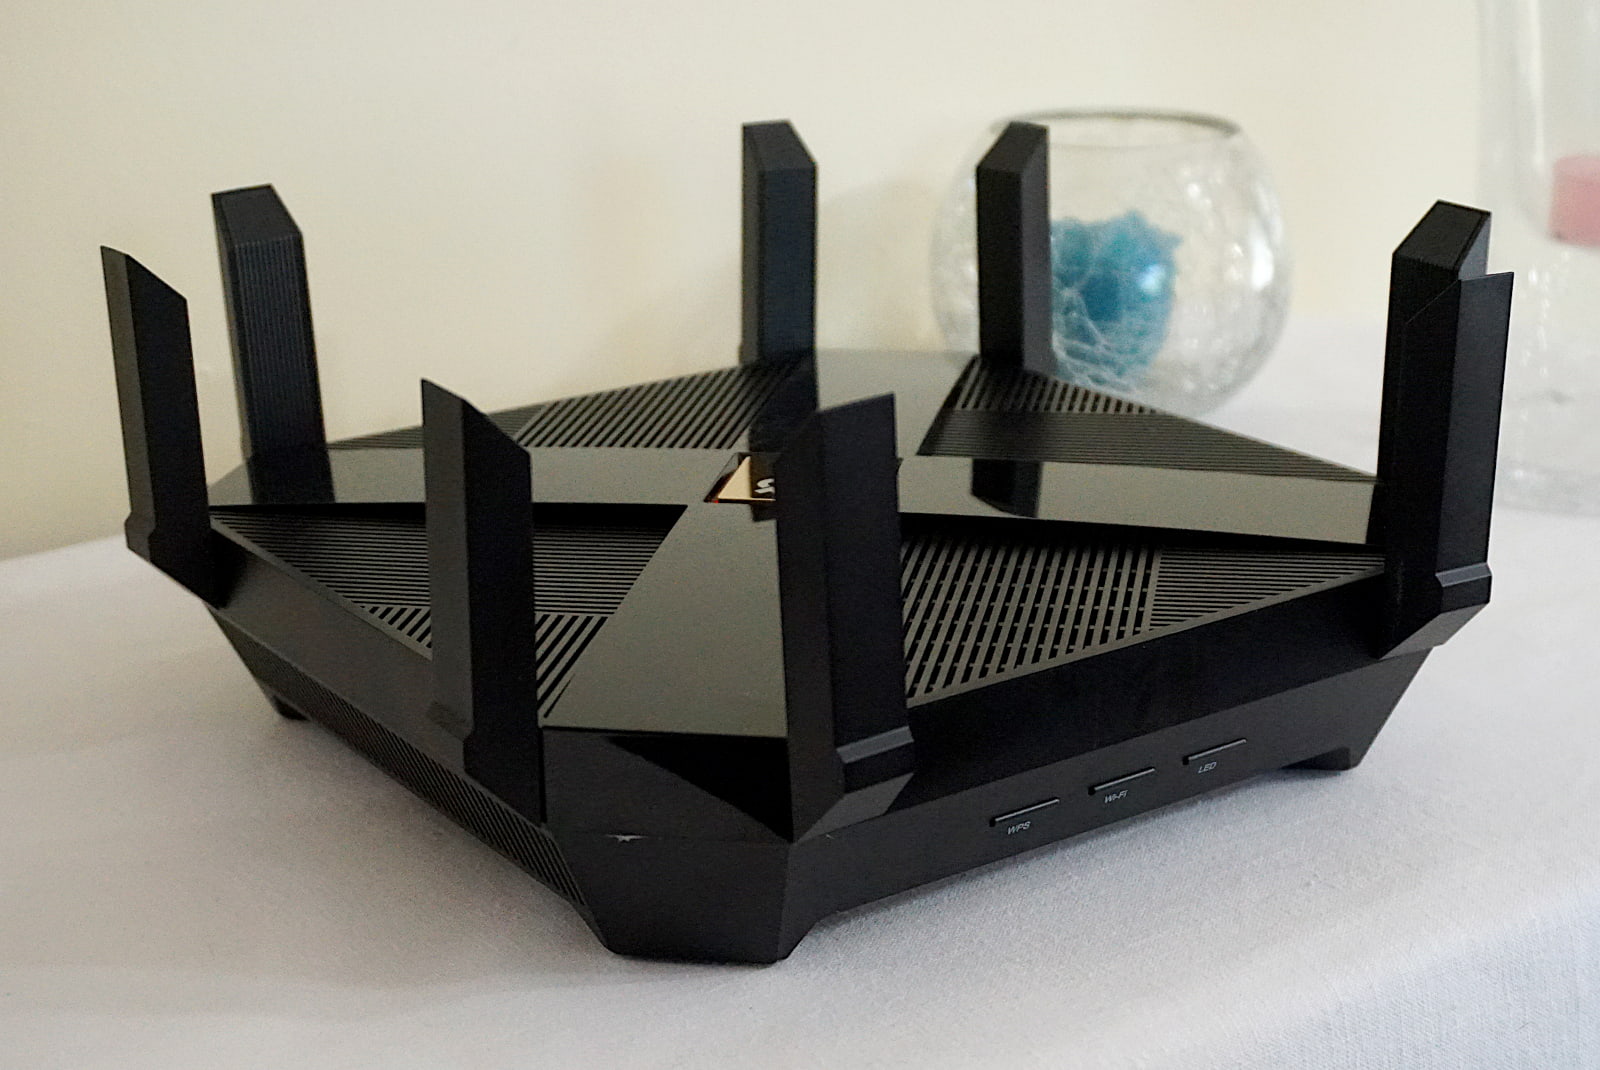 The Archer AX6000 is one of the fastest routers we’ve tested to date.